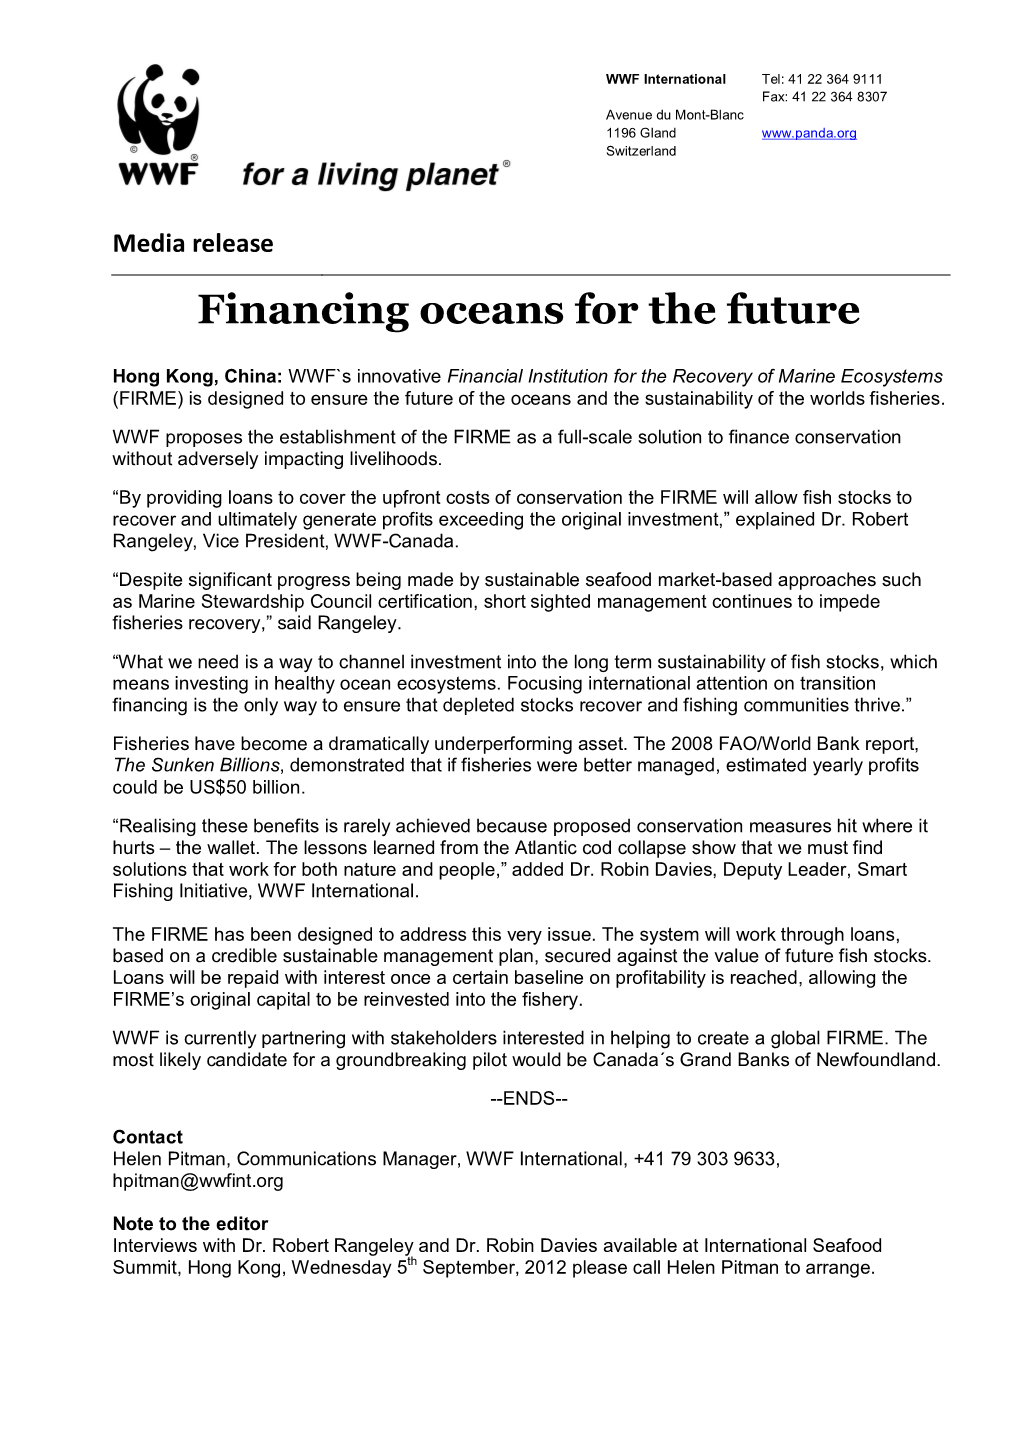 Financing Oceans for the Future